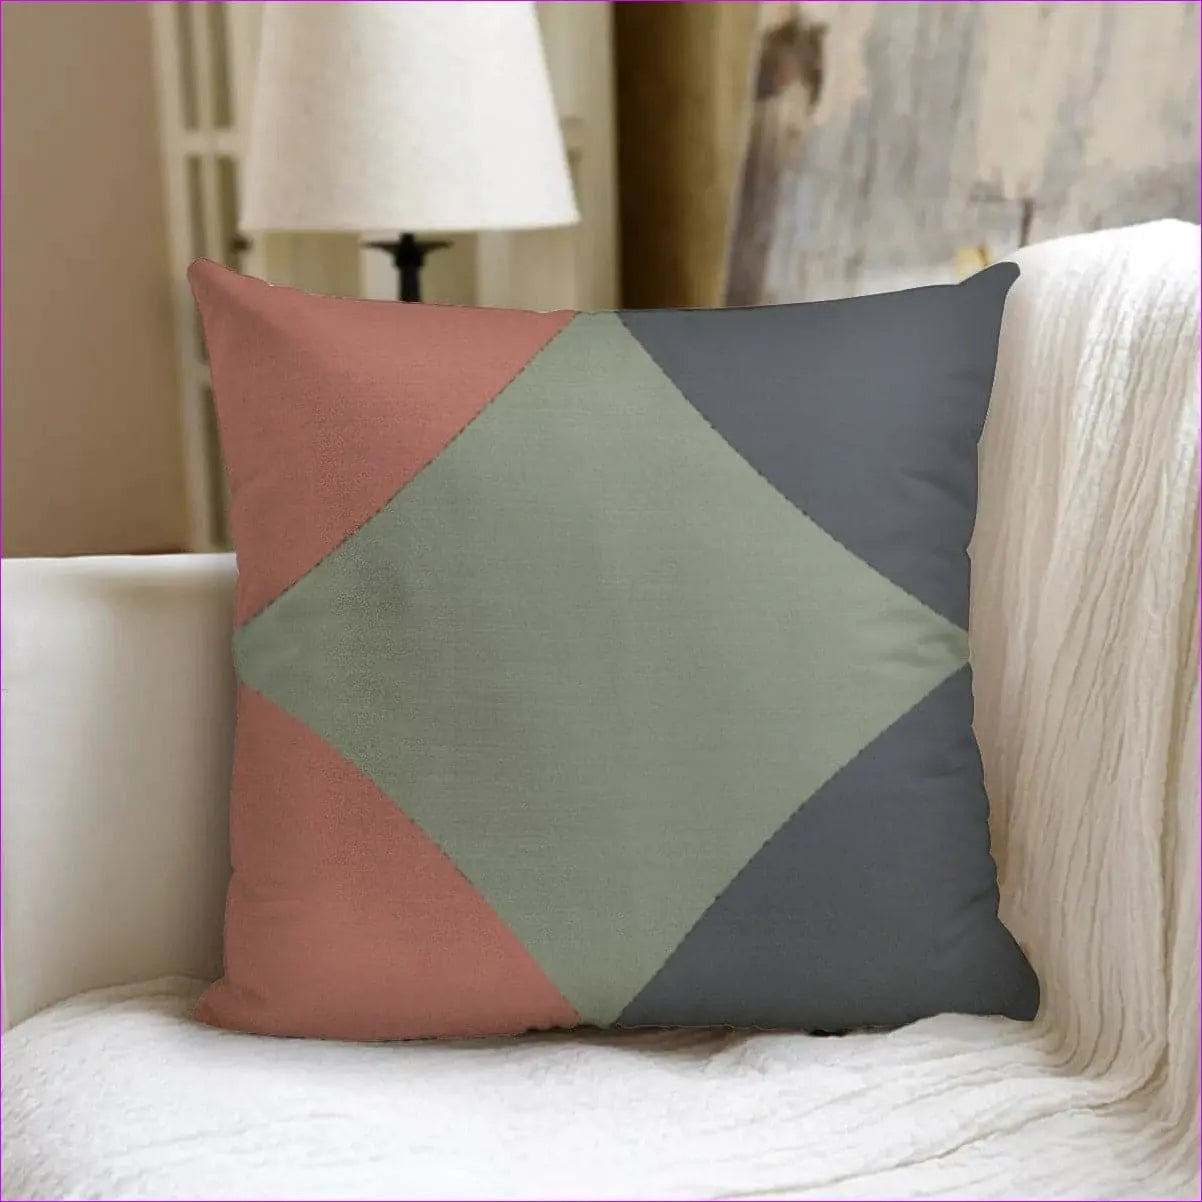 M multi-colored - Eclectic 3 Double Sided Couch Pillow with Pillow Inserts - couch pillow at TFC&H Co.